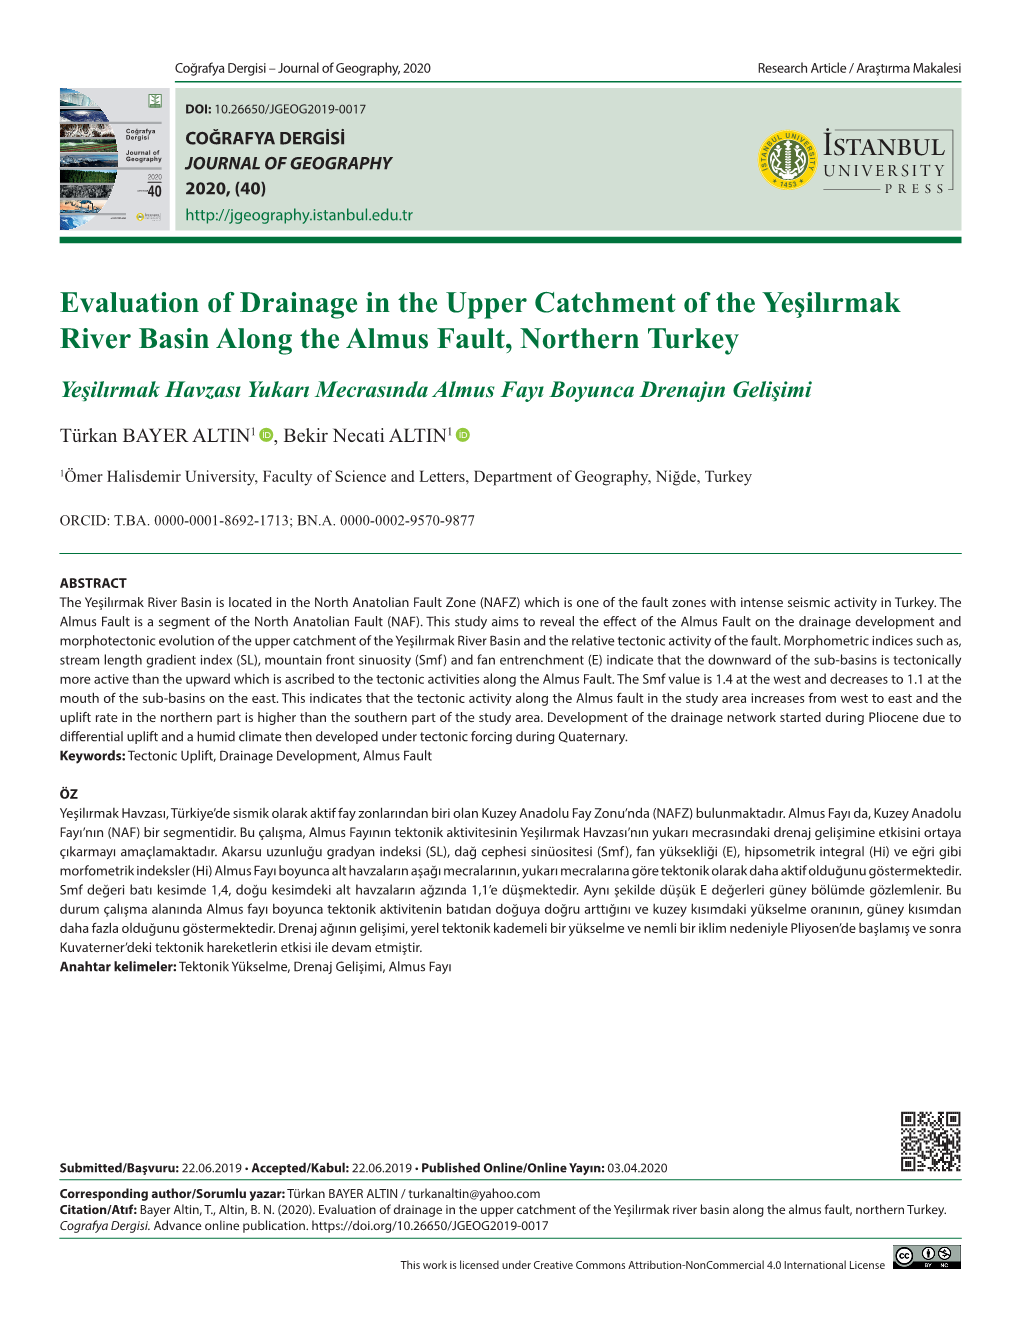 Evaluation of Drainage in the Upper Catchment of the Yeşilırmak River Basin Along the Almus Fault, Northern Turkey